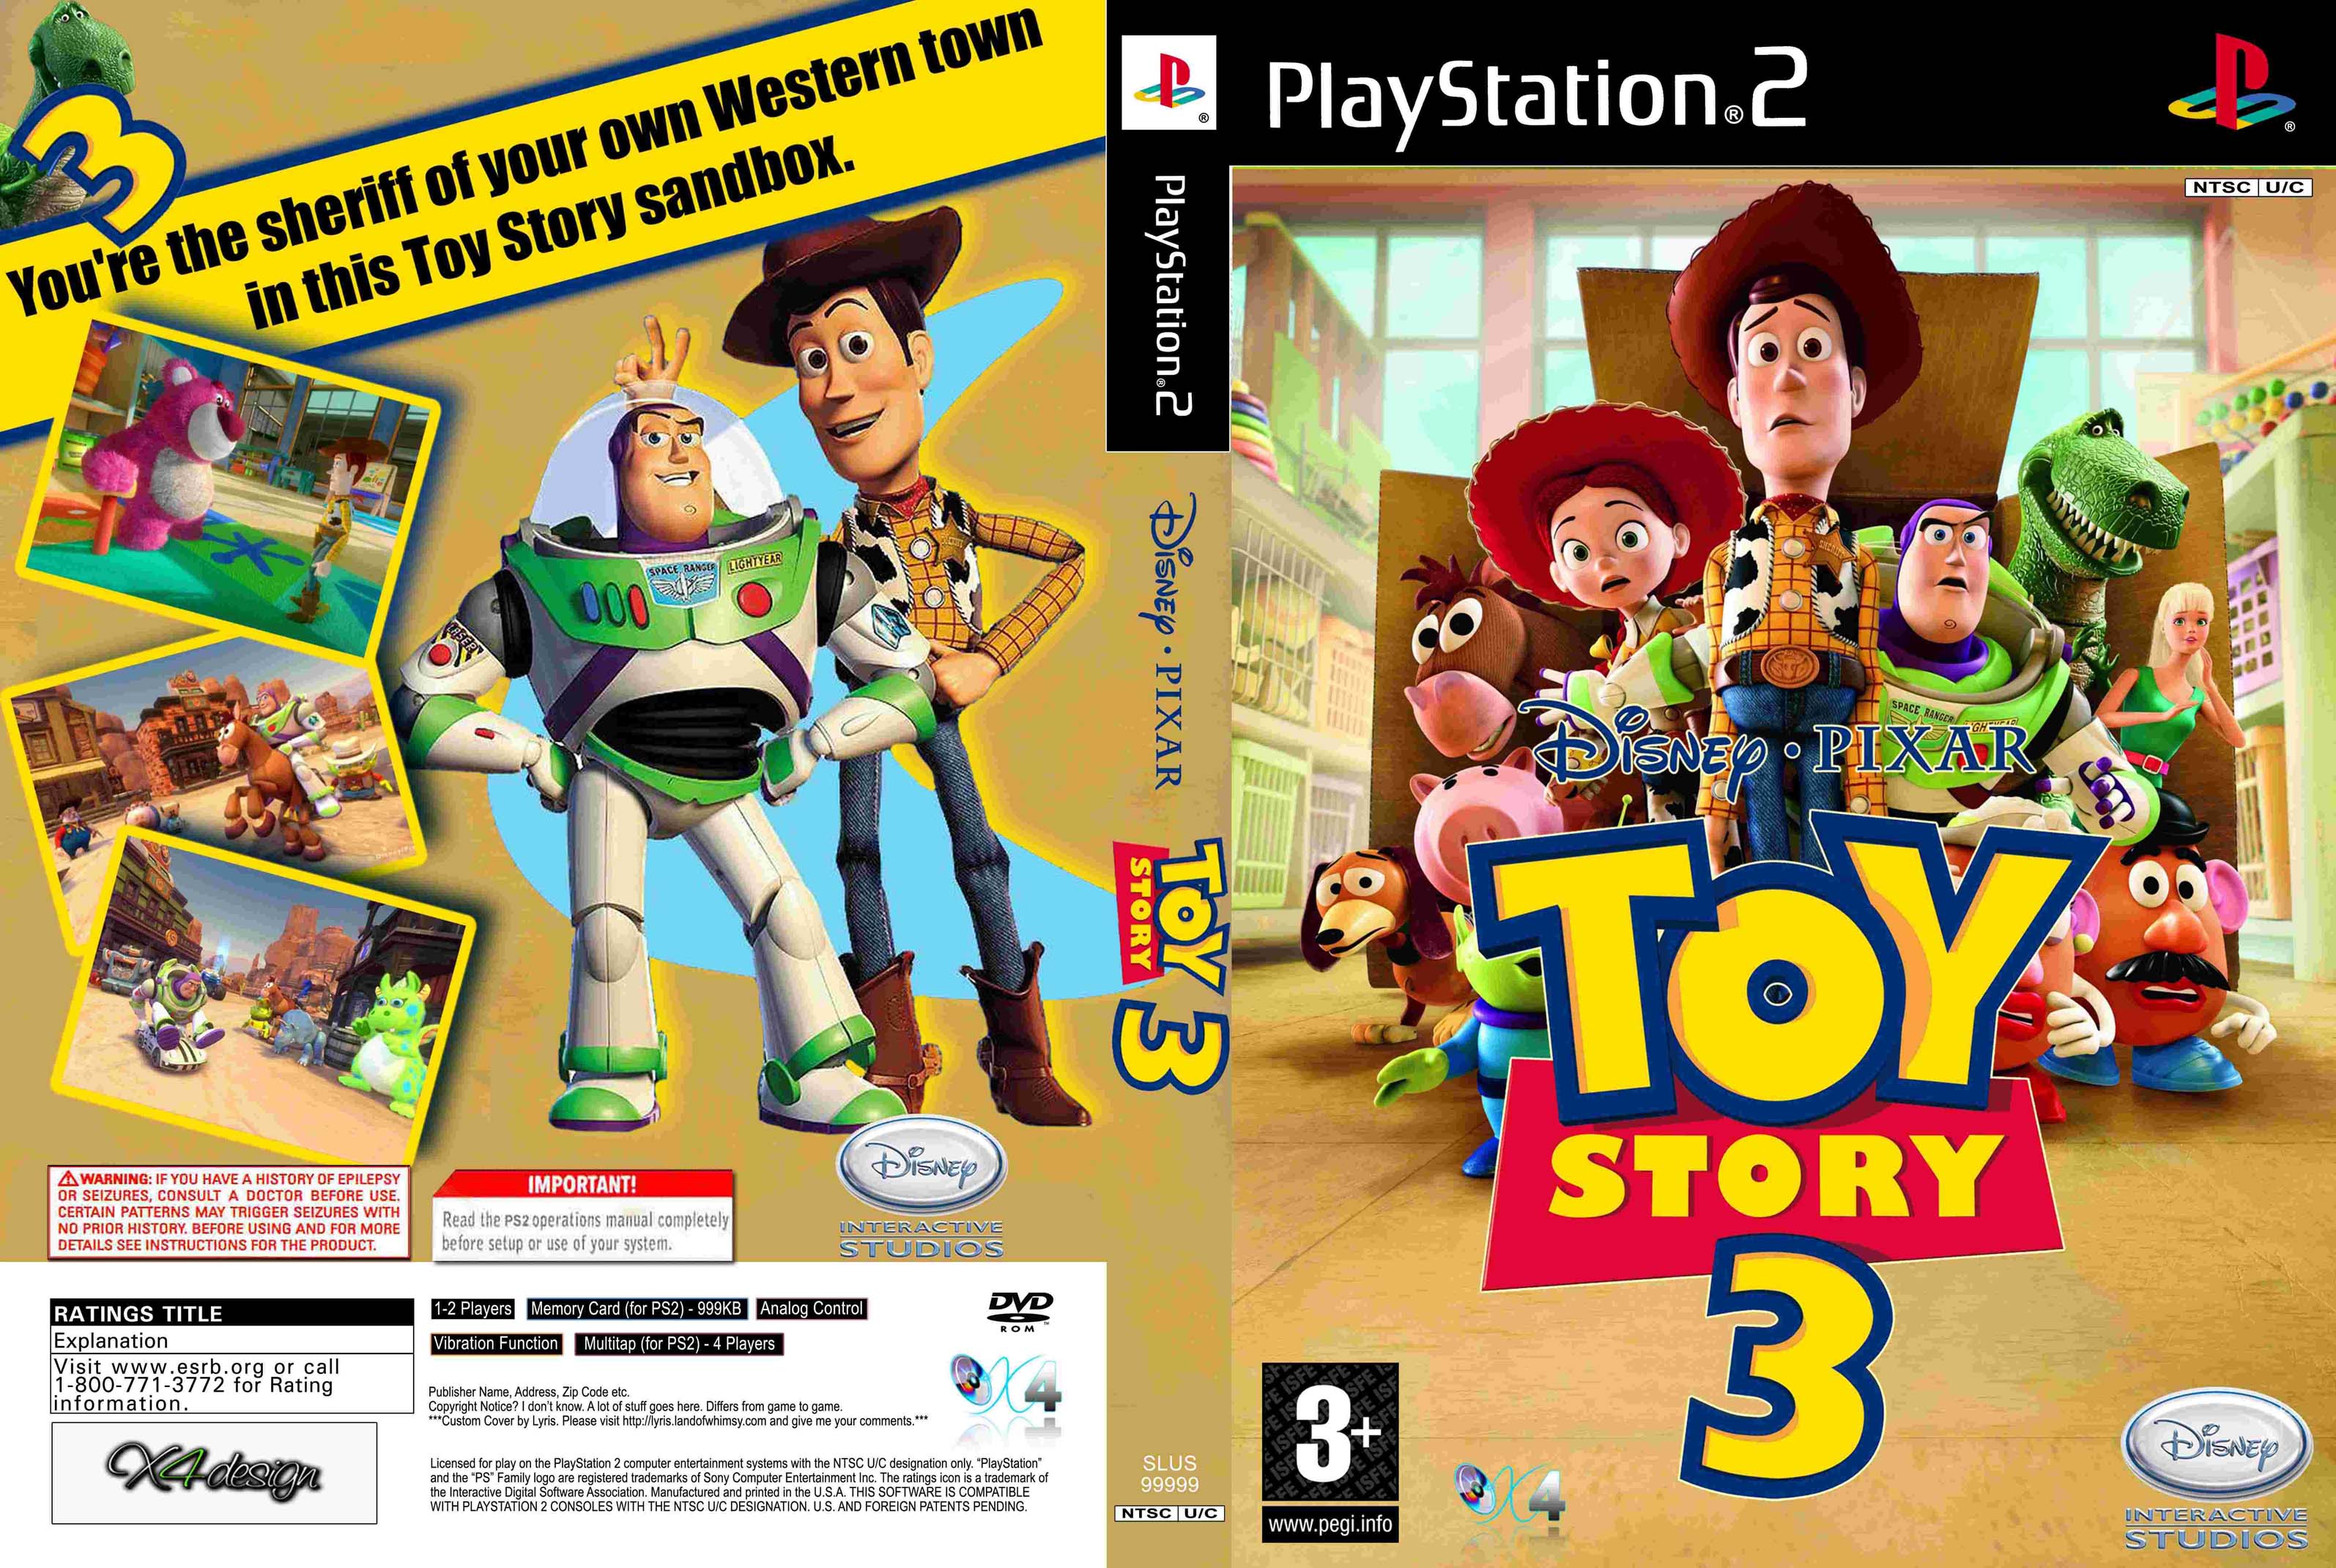 Скачай toy 2. Toy story 3 ps2. Toy story 3 ps2 обложка. Disney-Pixar Toy story 3 ps2. Toy story 3 the videogame ps3 обложка.